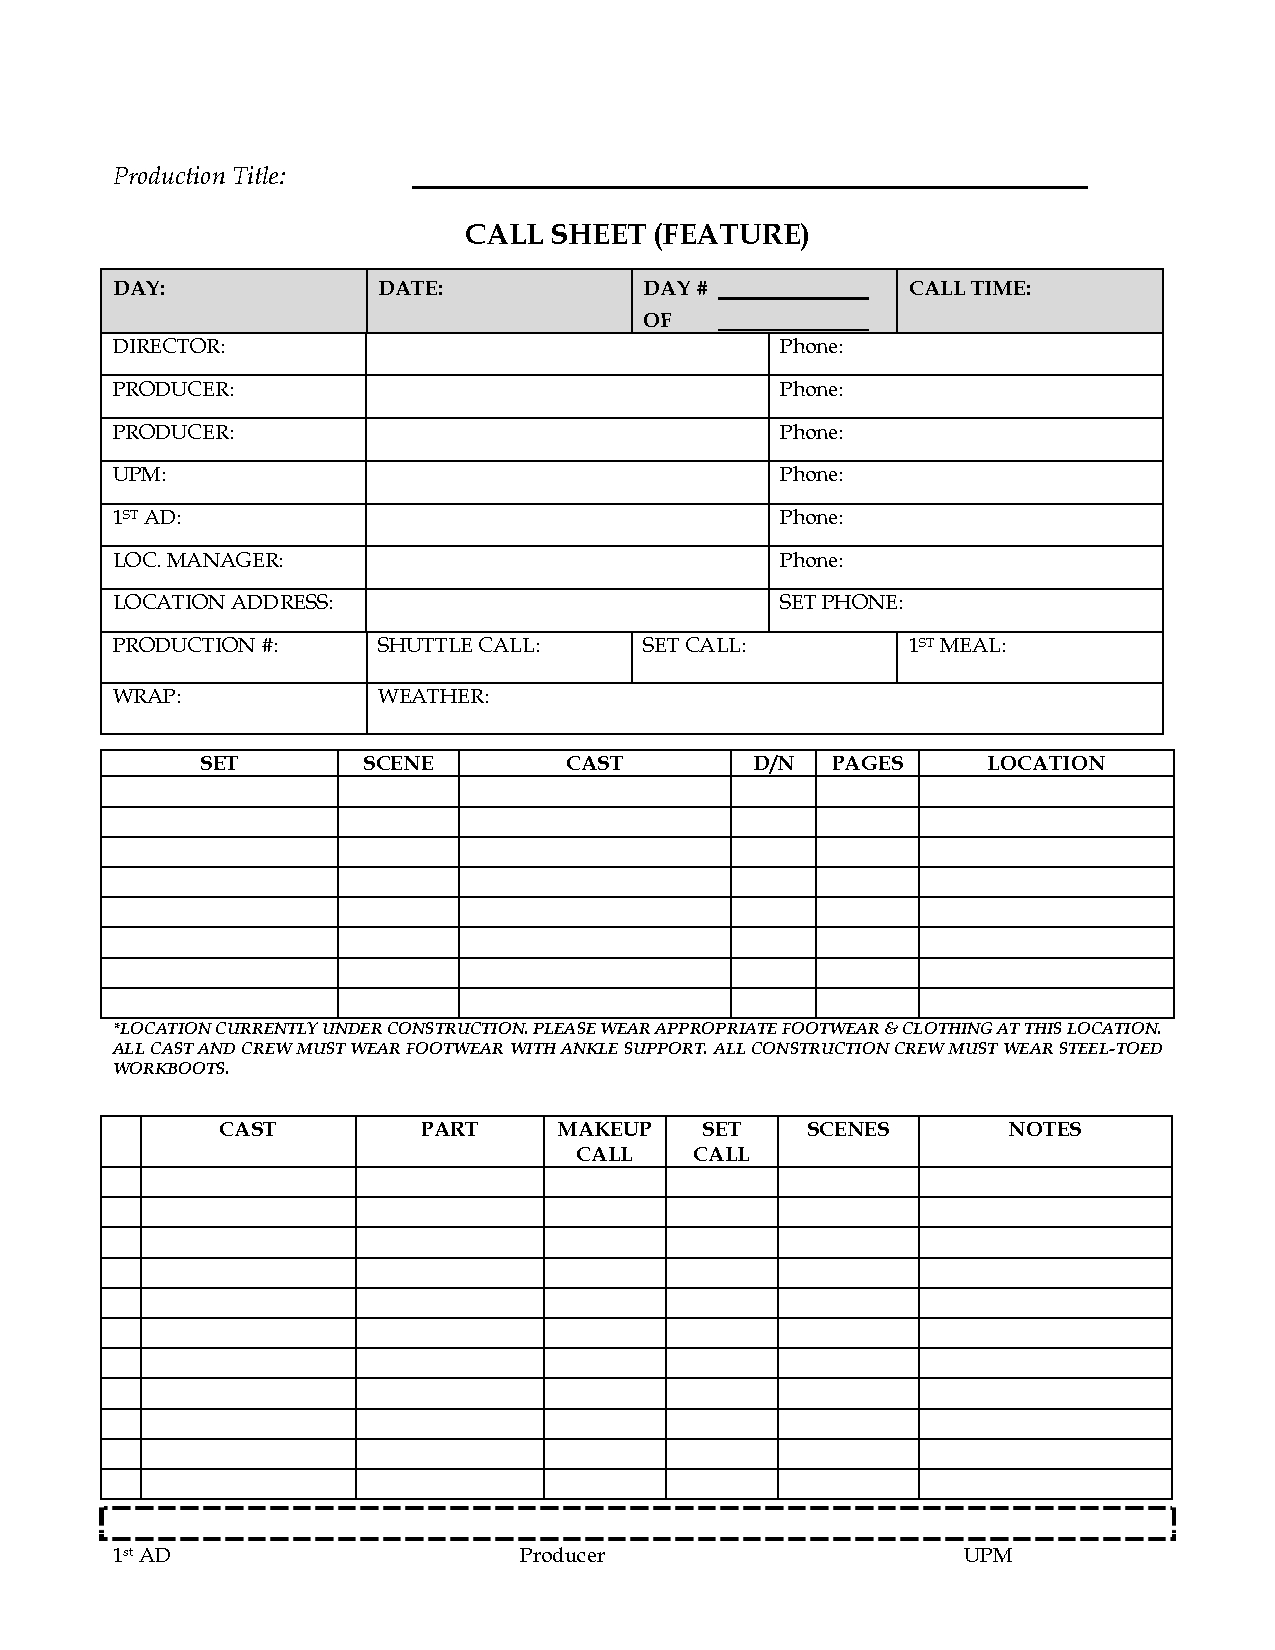 Awesome Call Sheet (Feature) Template Sample For Film Inside Film Call Sheet Template Word